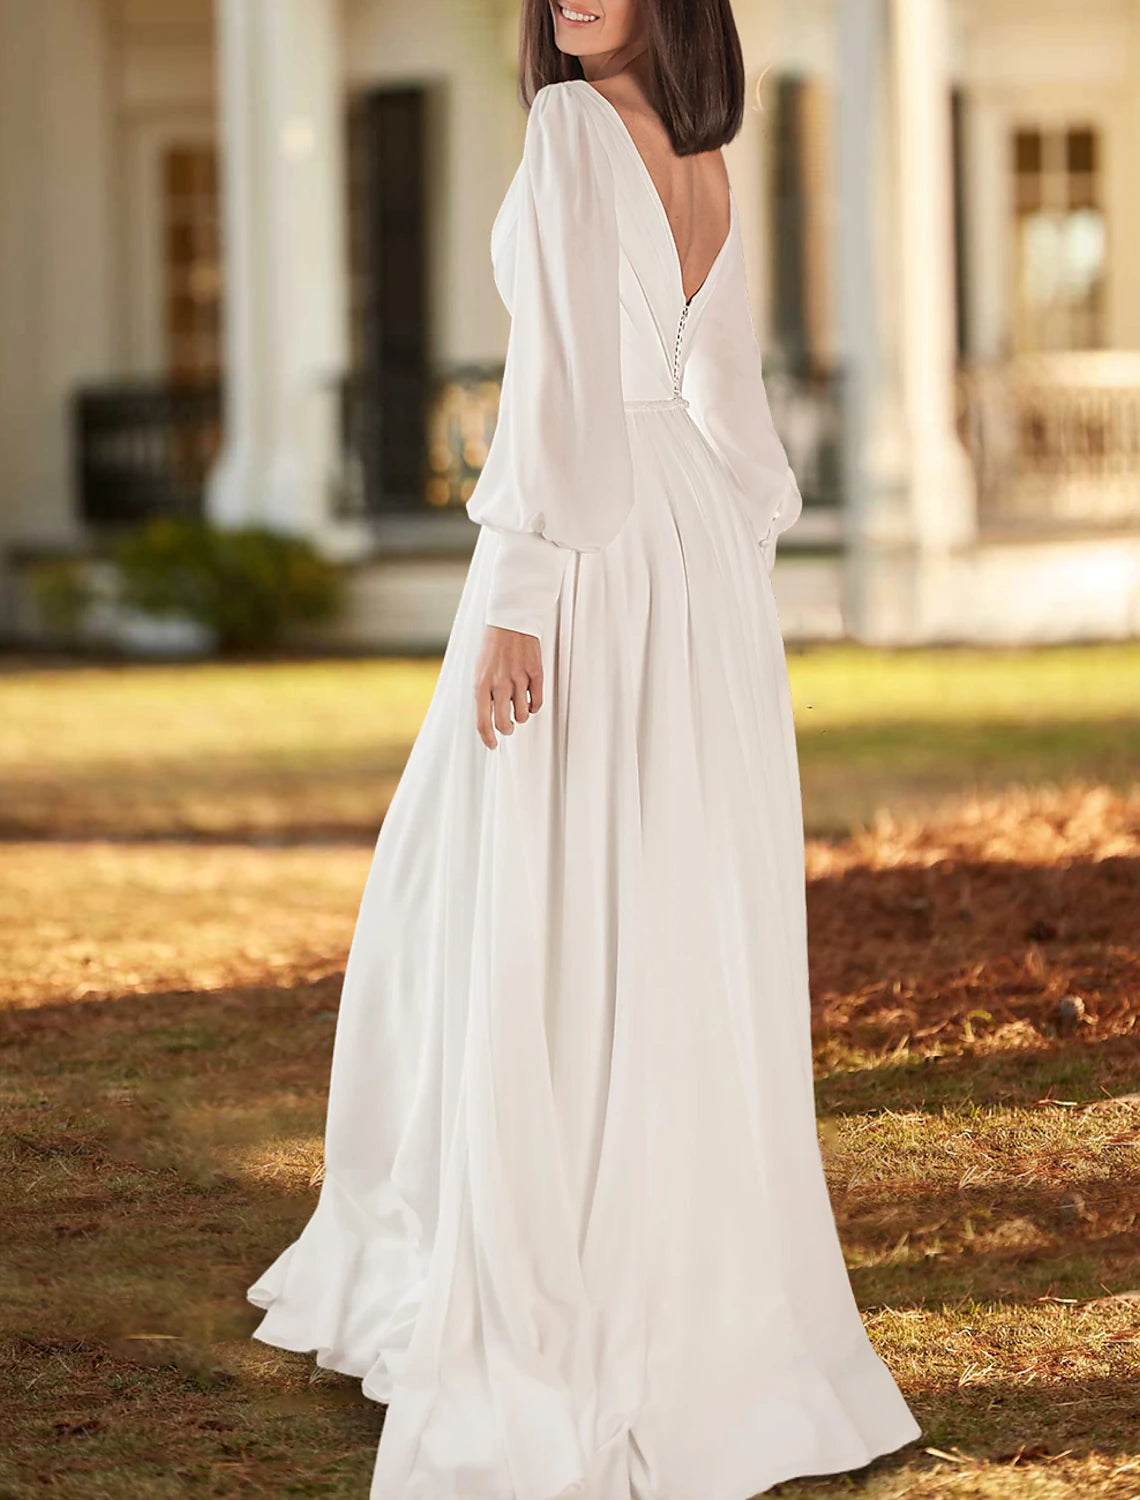 Simple Wedding Dresses A-Line V Neck Long Sleeve Sweep / Brush Train Chiffon Bridal Gowns With Pleats